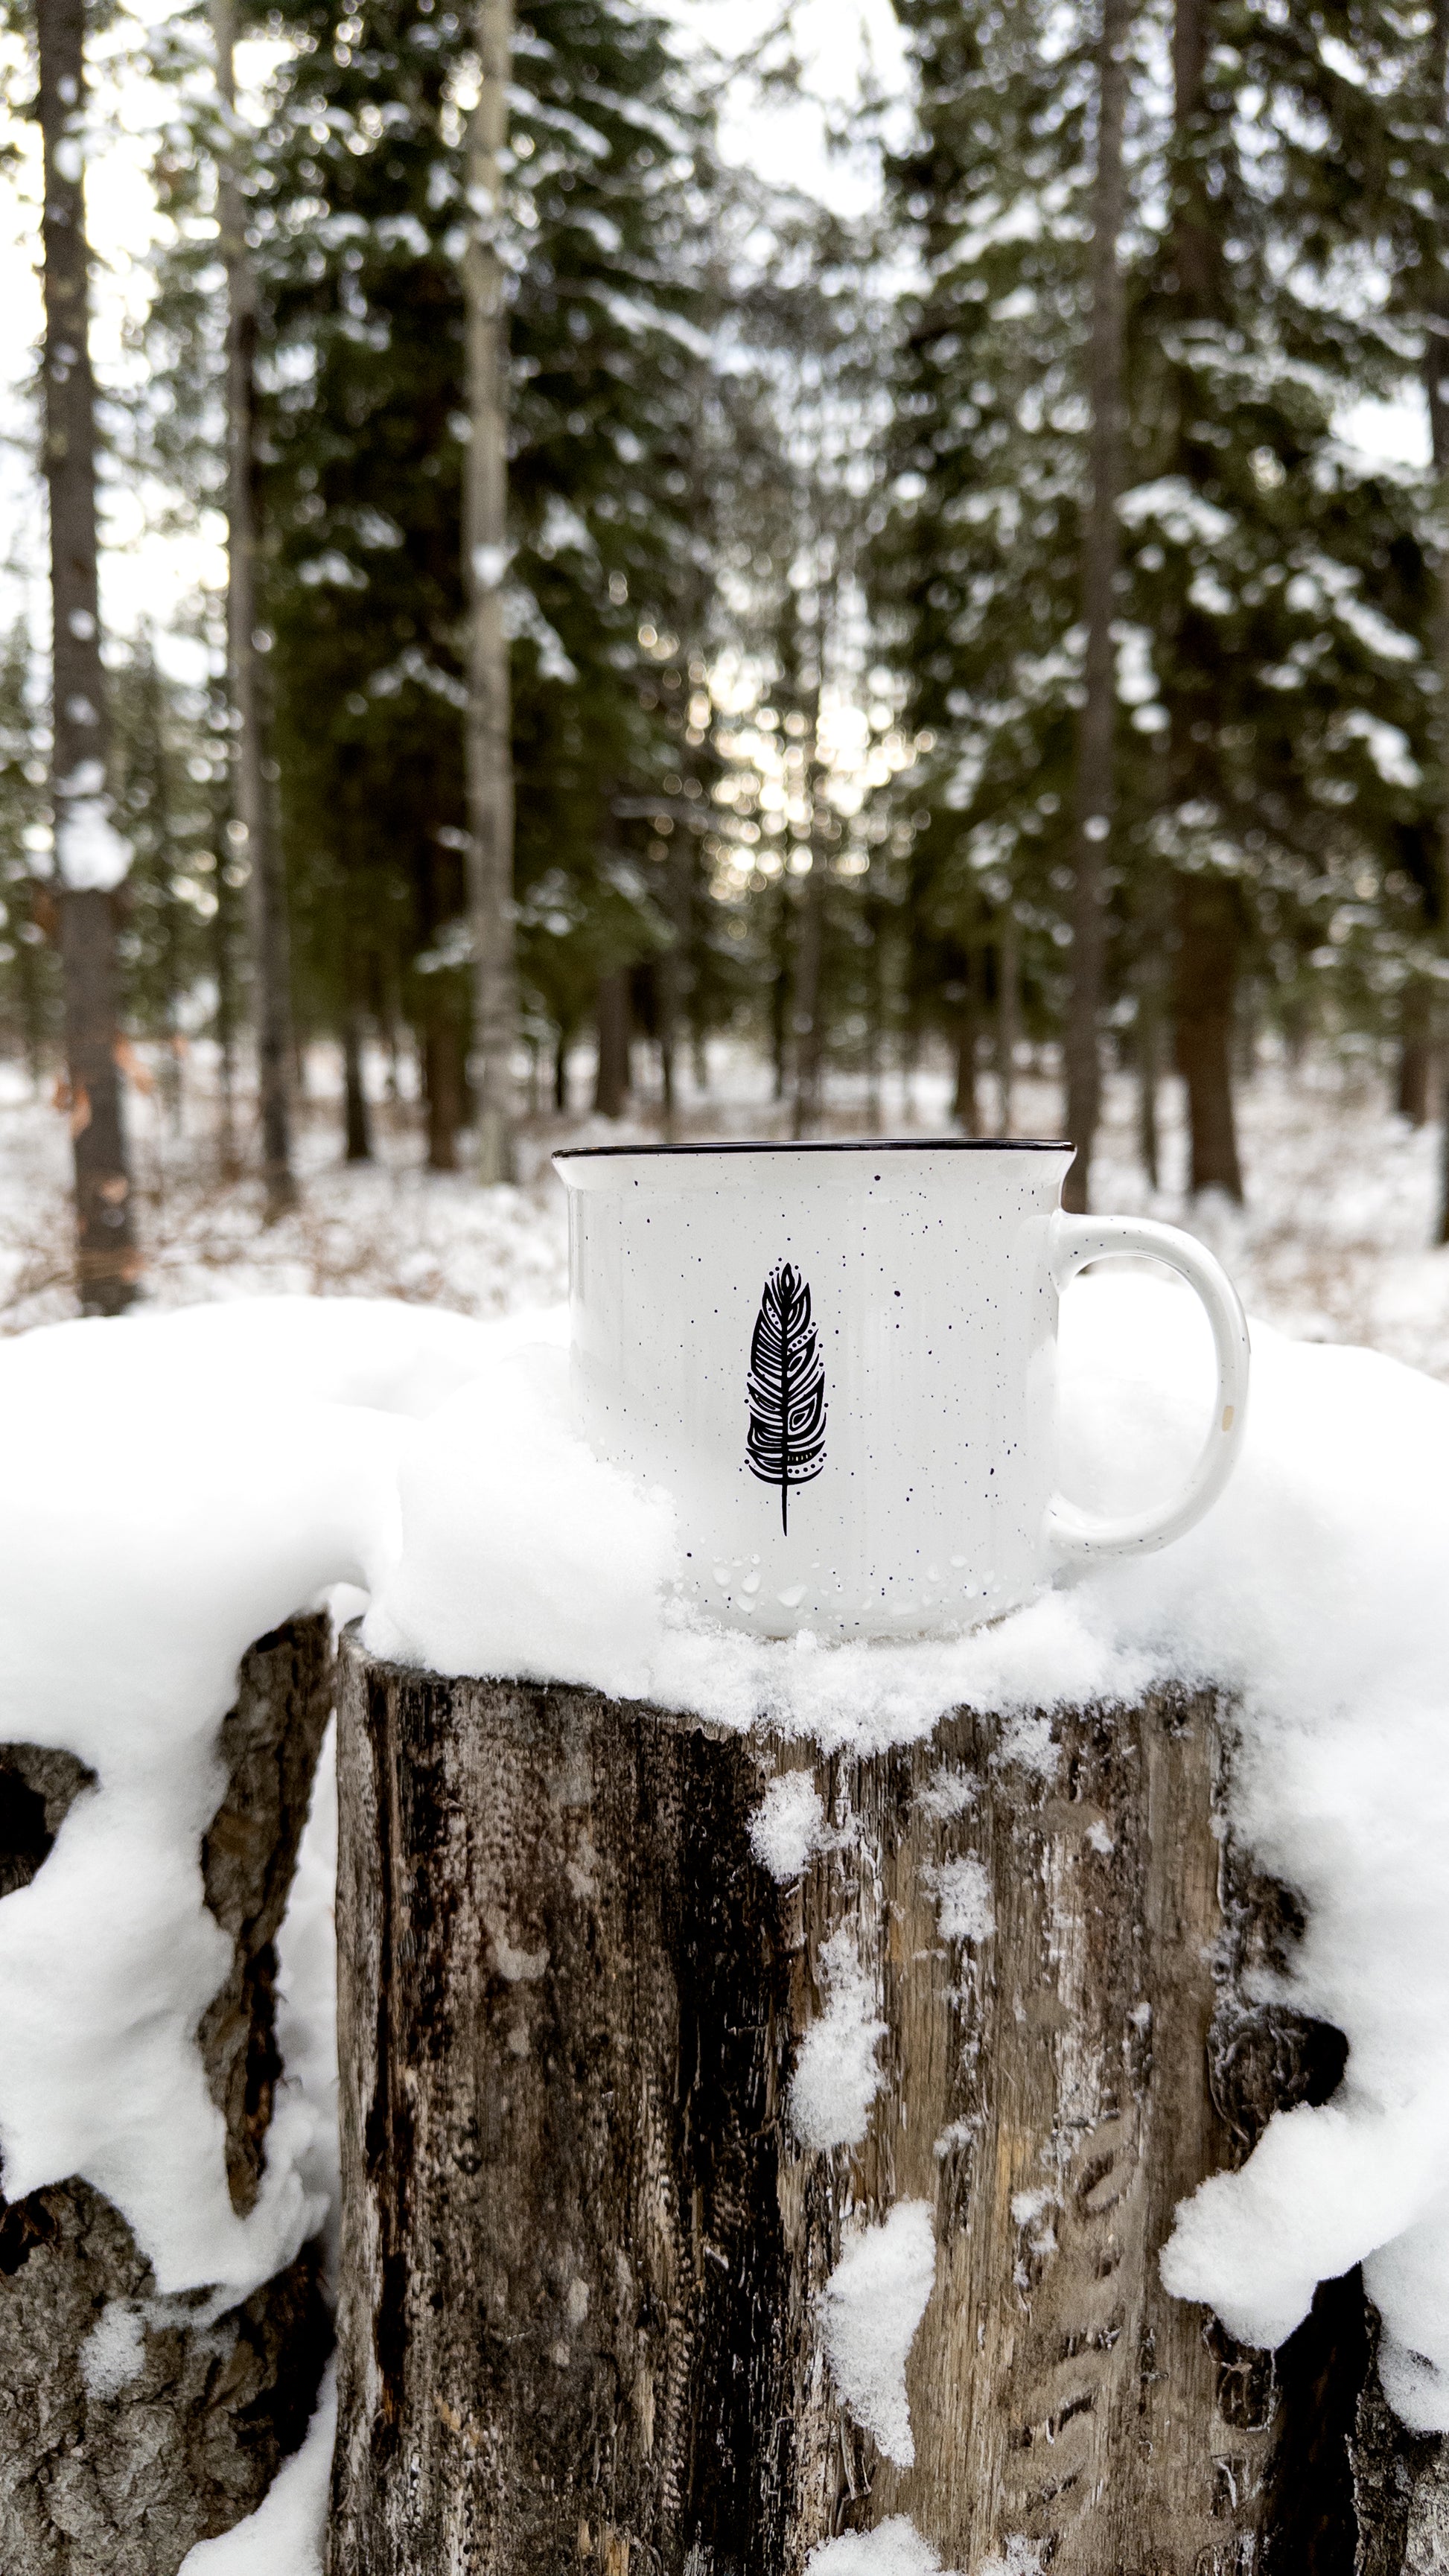 Ceramic mug with speckled finish and black rim, boasting Patrick's eagle feather in woodland art style, rests on a tree stump surrounded by snow. A snowy forest is out of focus in the background.